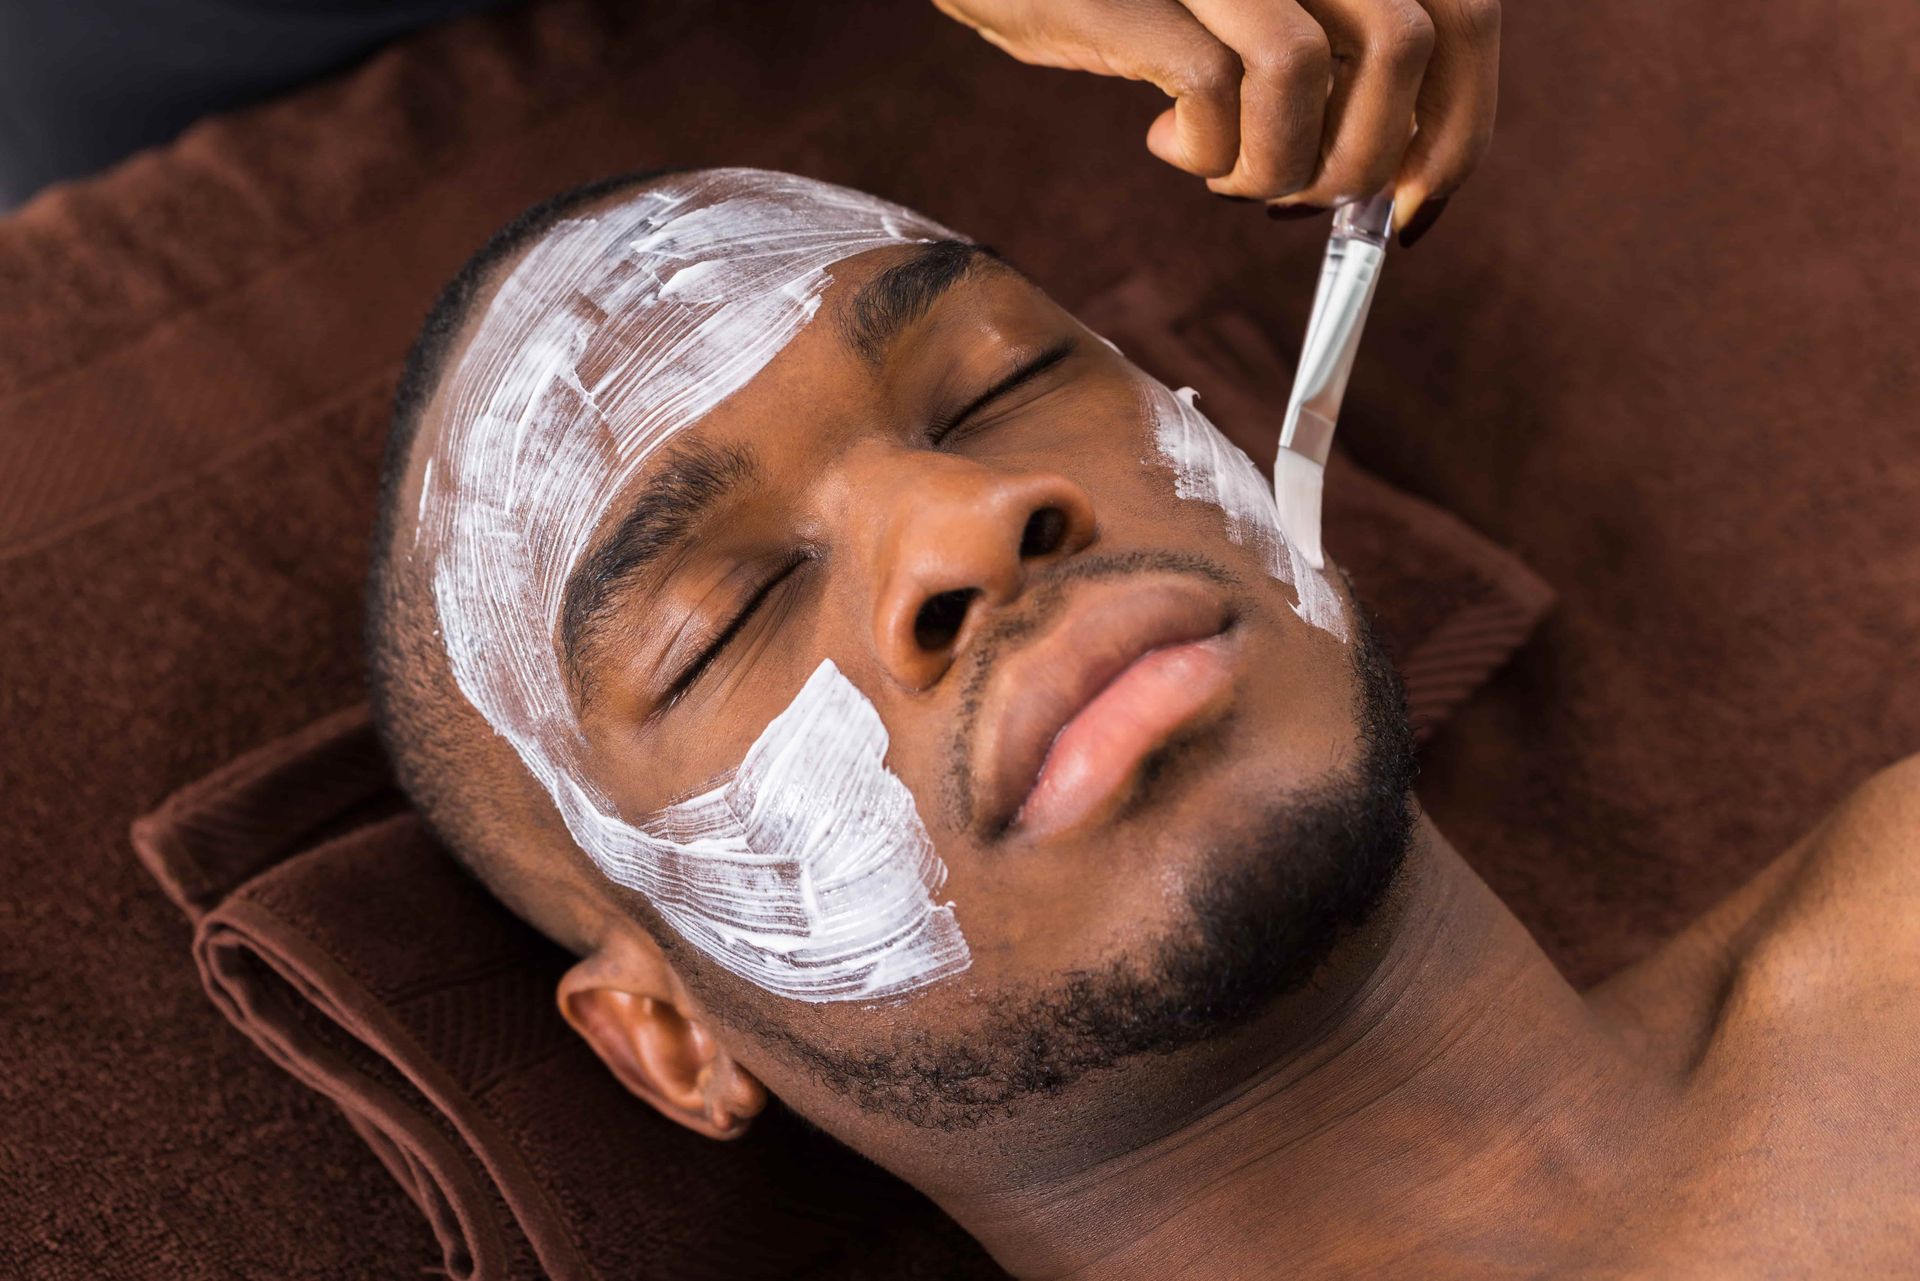 Men's Facials vs. Women's Facials: Is There a Real Difference?